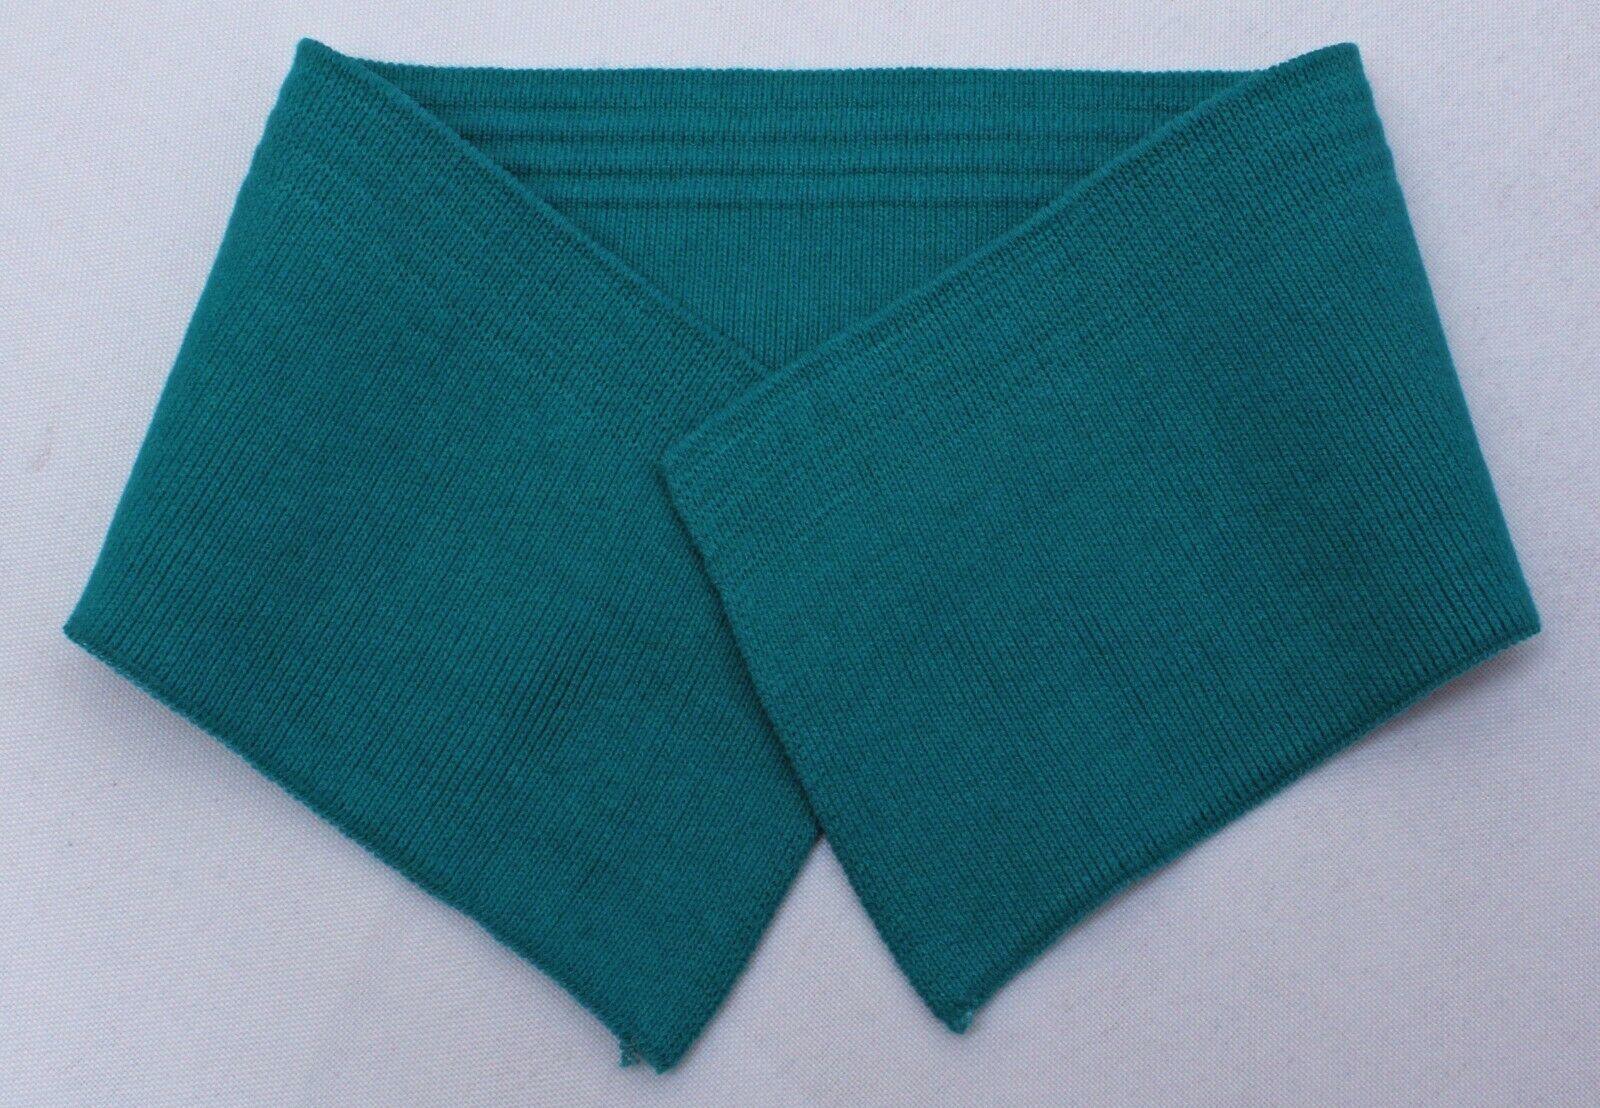 Primary image for Rugby Knit Shirt Collar Turquoise 3.5" x 17" Self-Finished Hemmed Trim M515.08